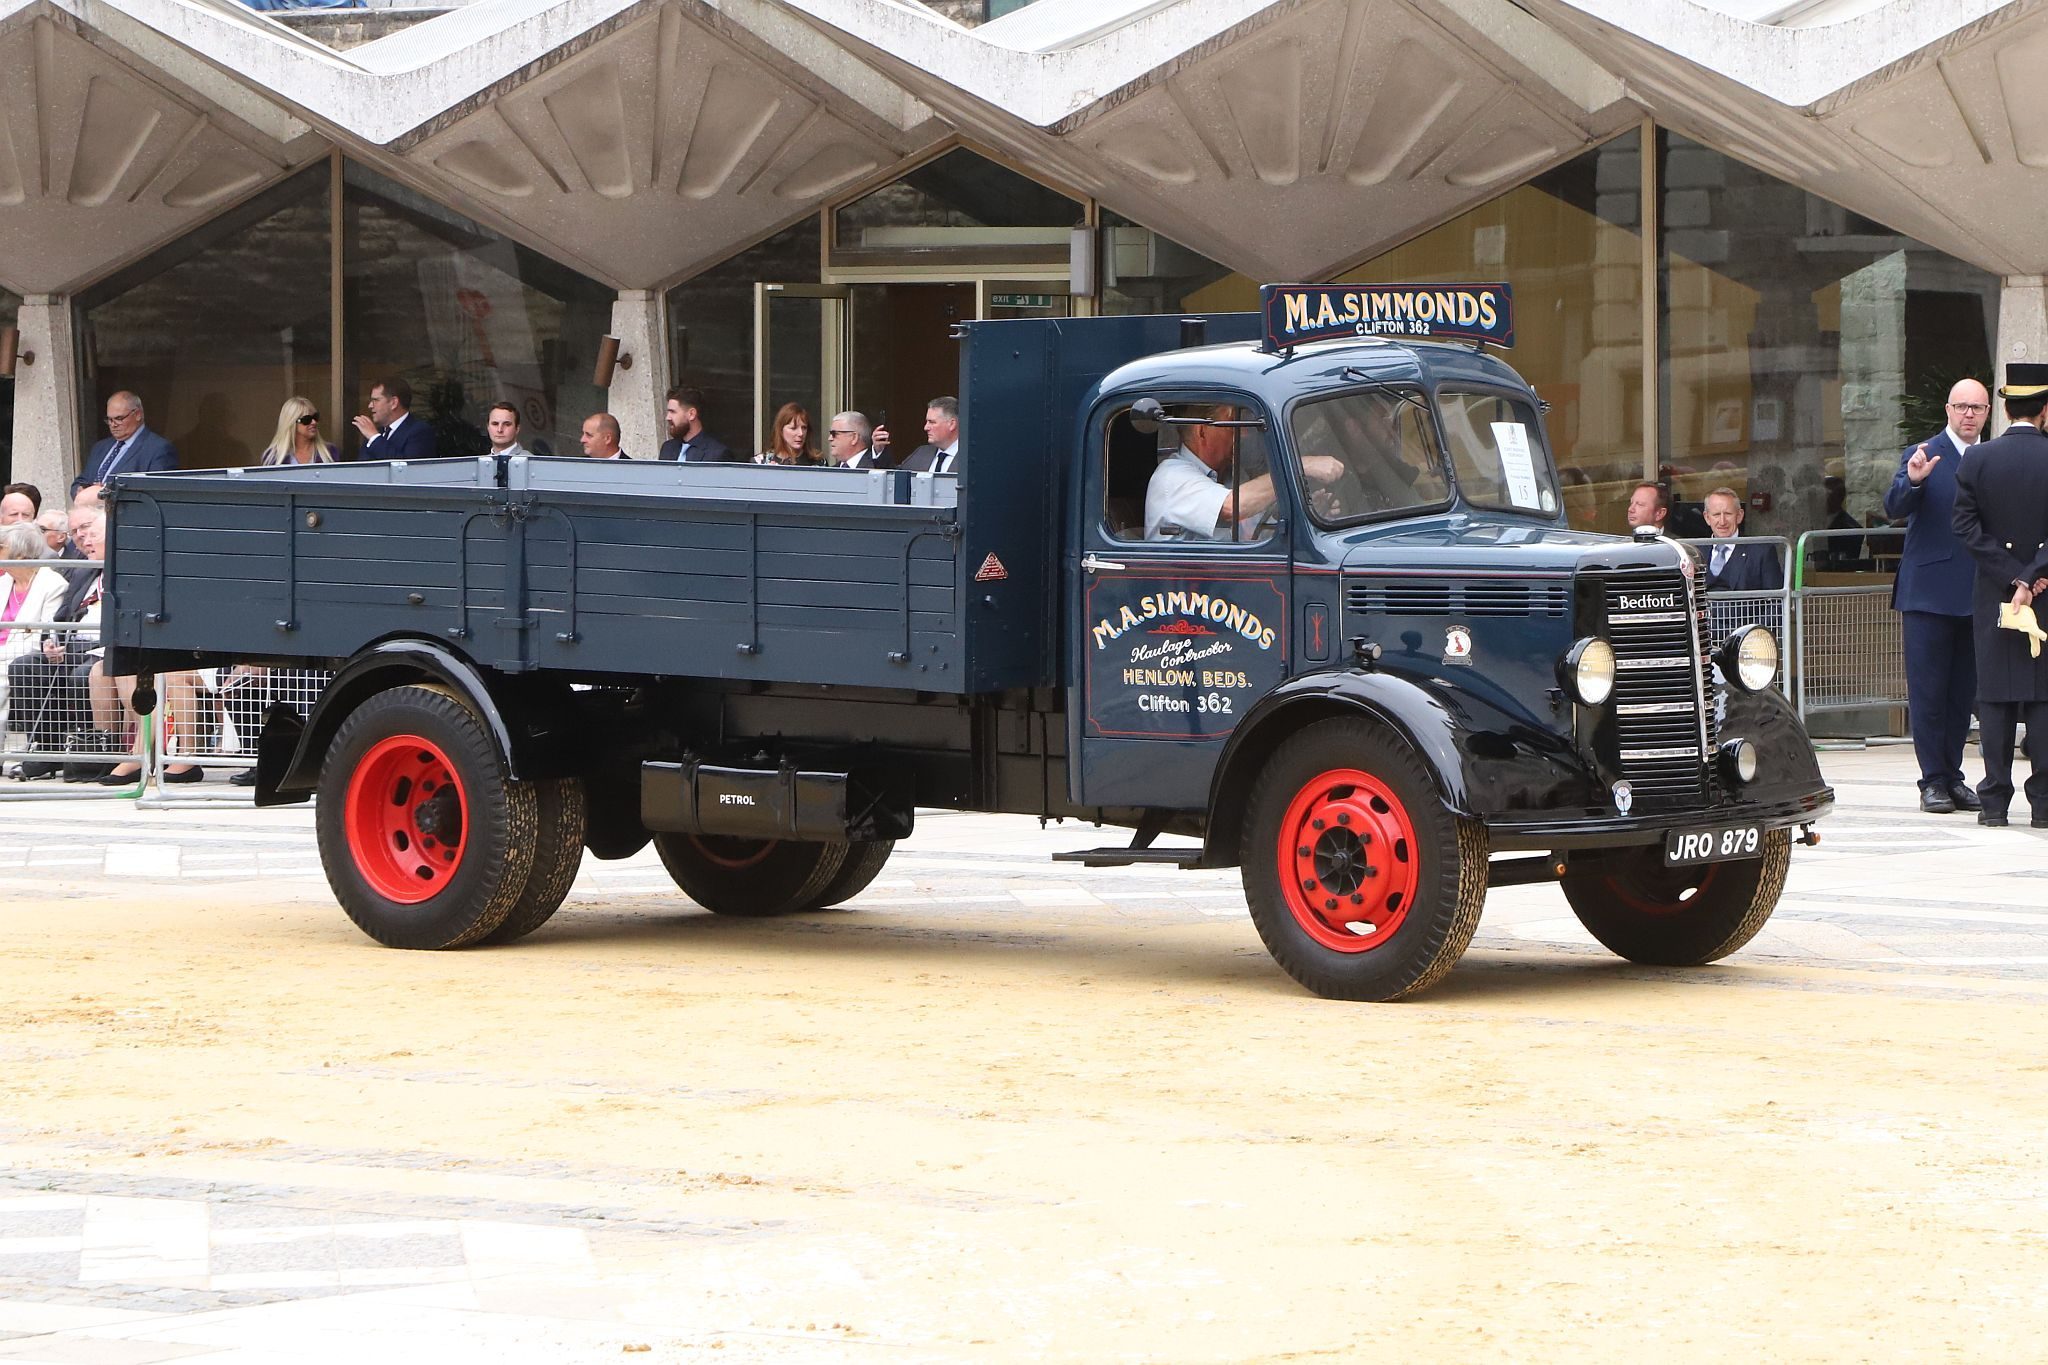 Bedford O Type 1948, JRO879. City of London 2023 Cart Marking in Guildhall Yard on 22-Jul-2023. Hosted by the Worshipful Company of Carmen with the Lord Mayor of the City of London in attendance. Wooden plates on the vehicles are branded with hot irons to allow them to ply for trade in the Square Mile. Another of the City Livery Company's annual ceremonies.